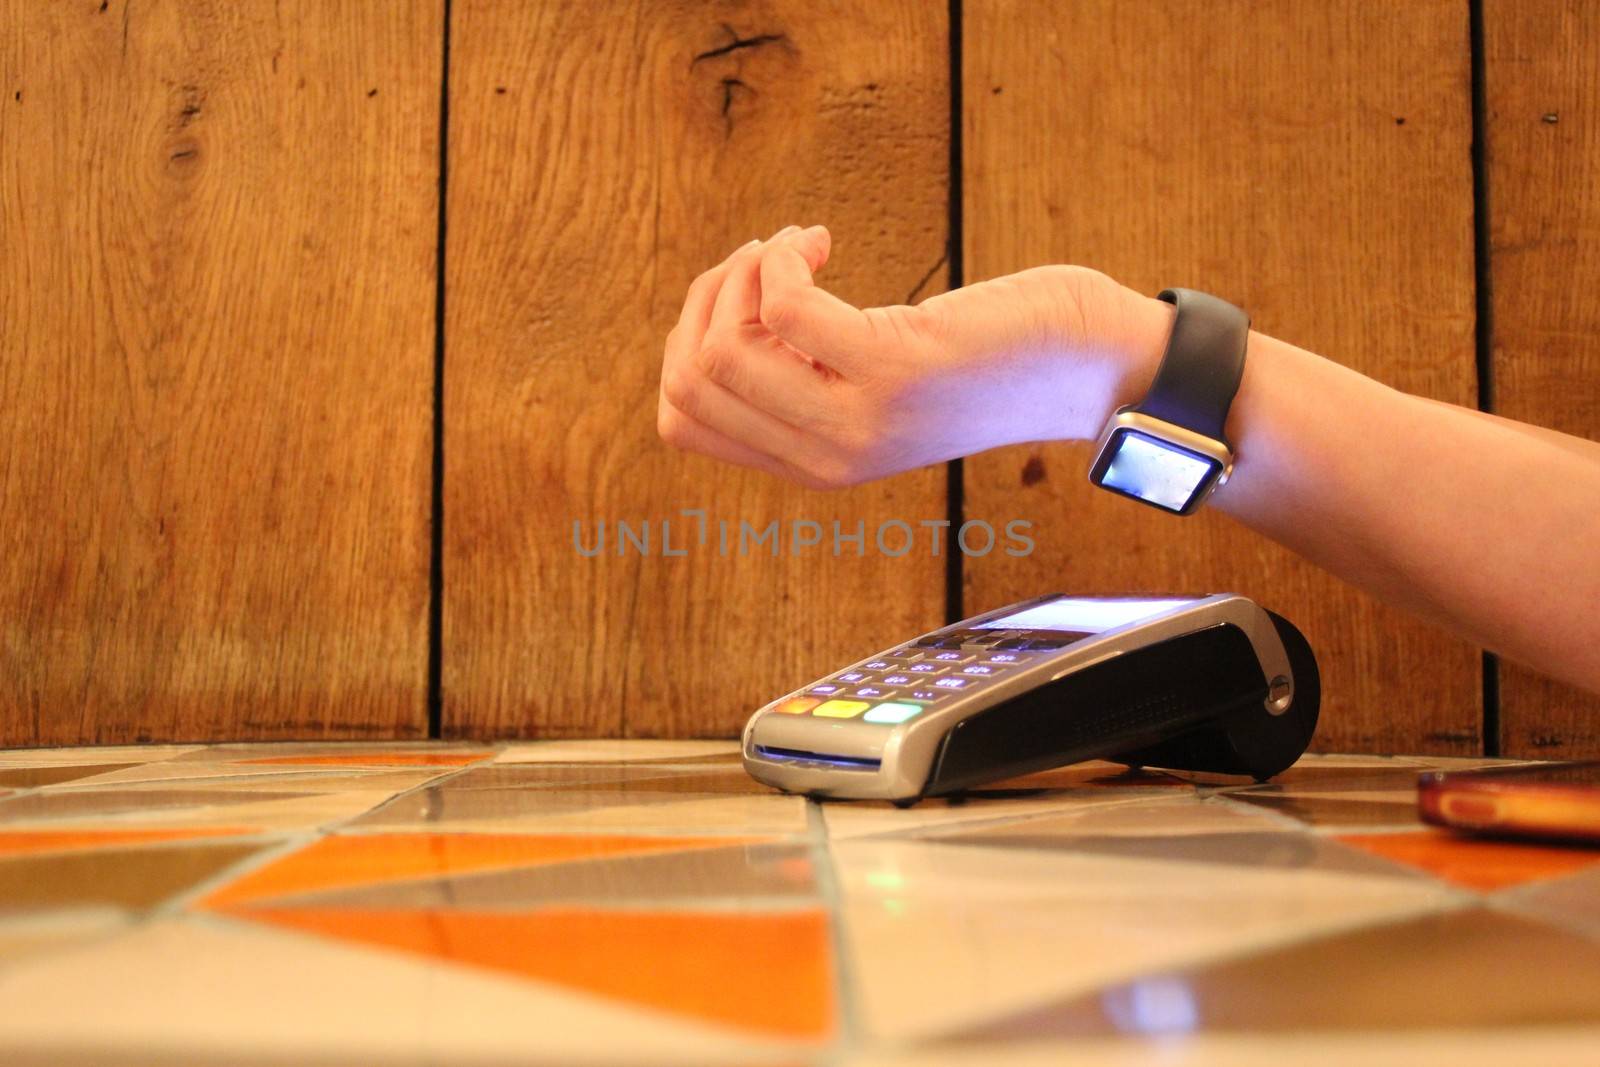 contactless payment watch smart pdq with hand holding credit card ready to pay